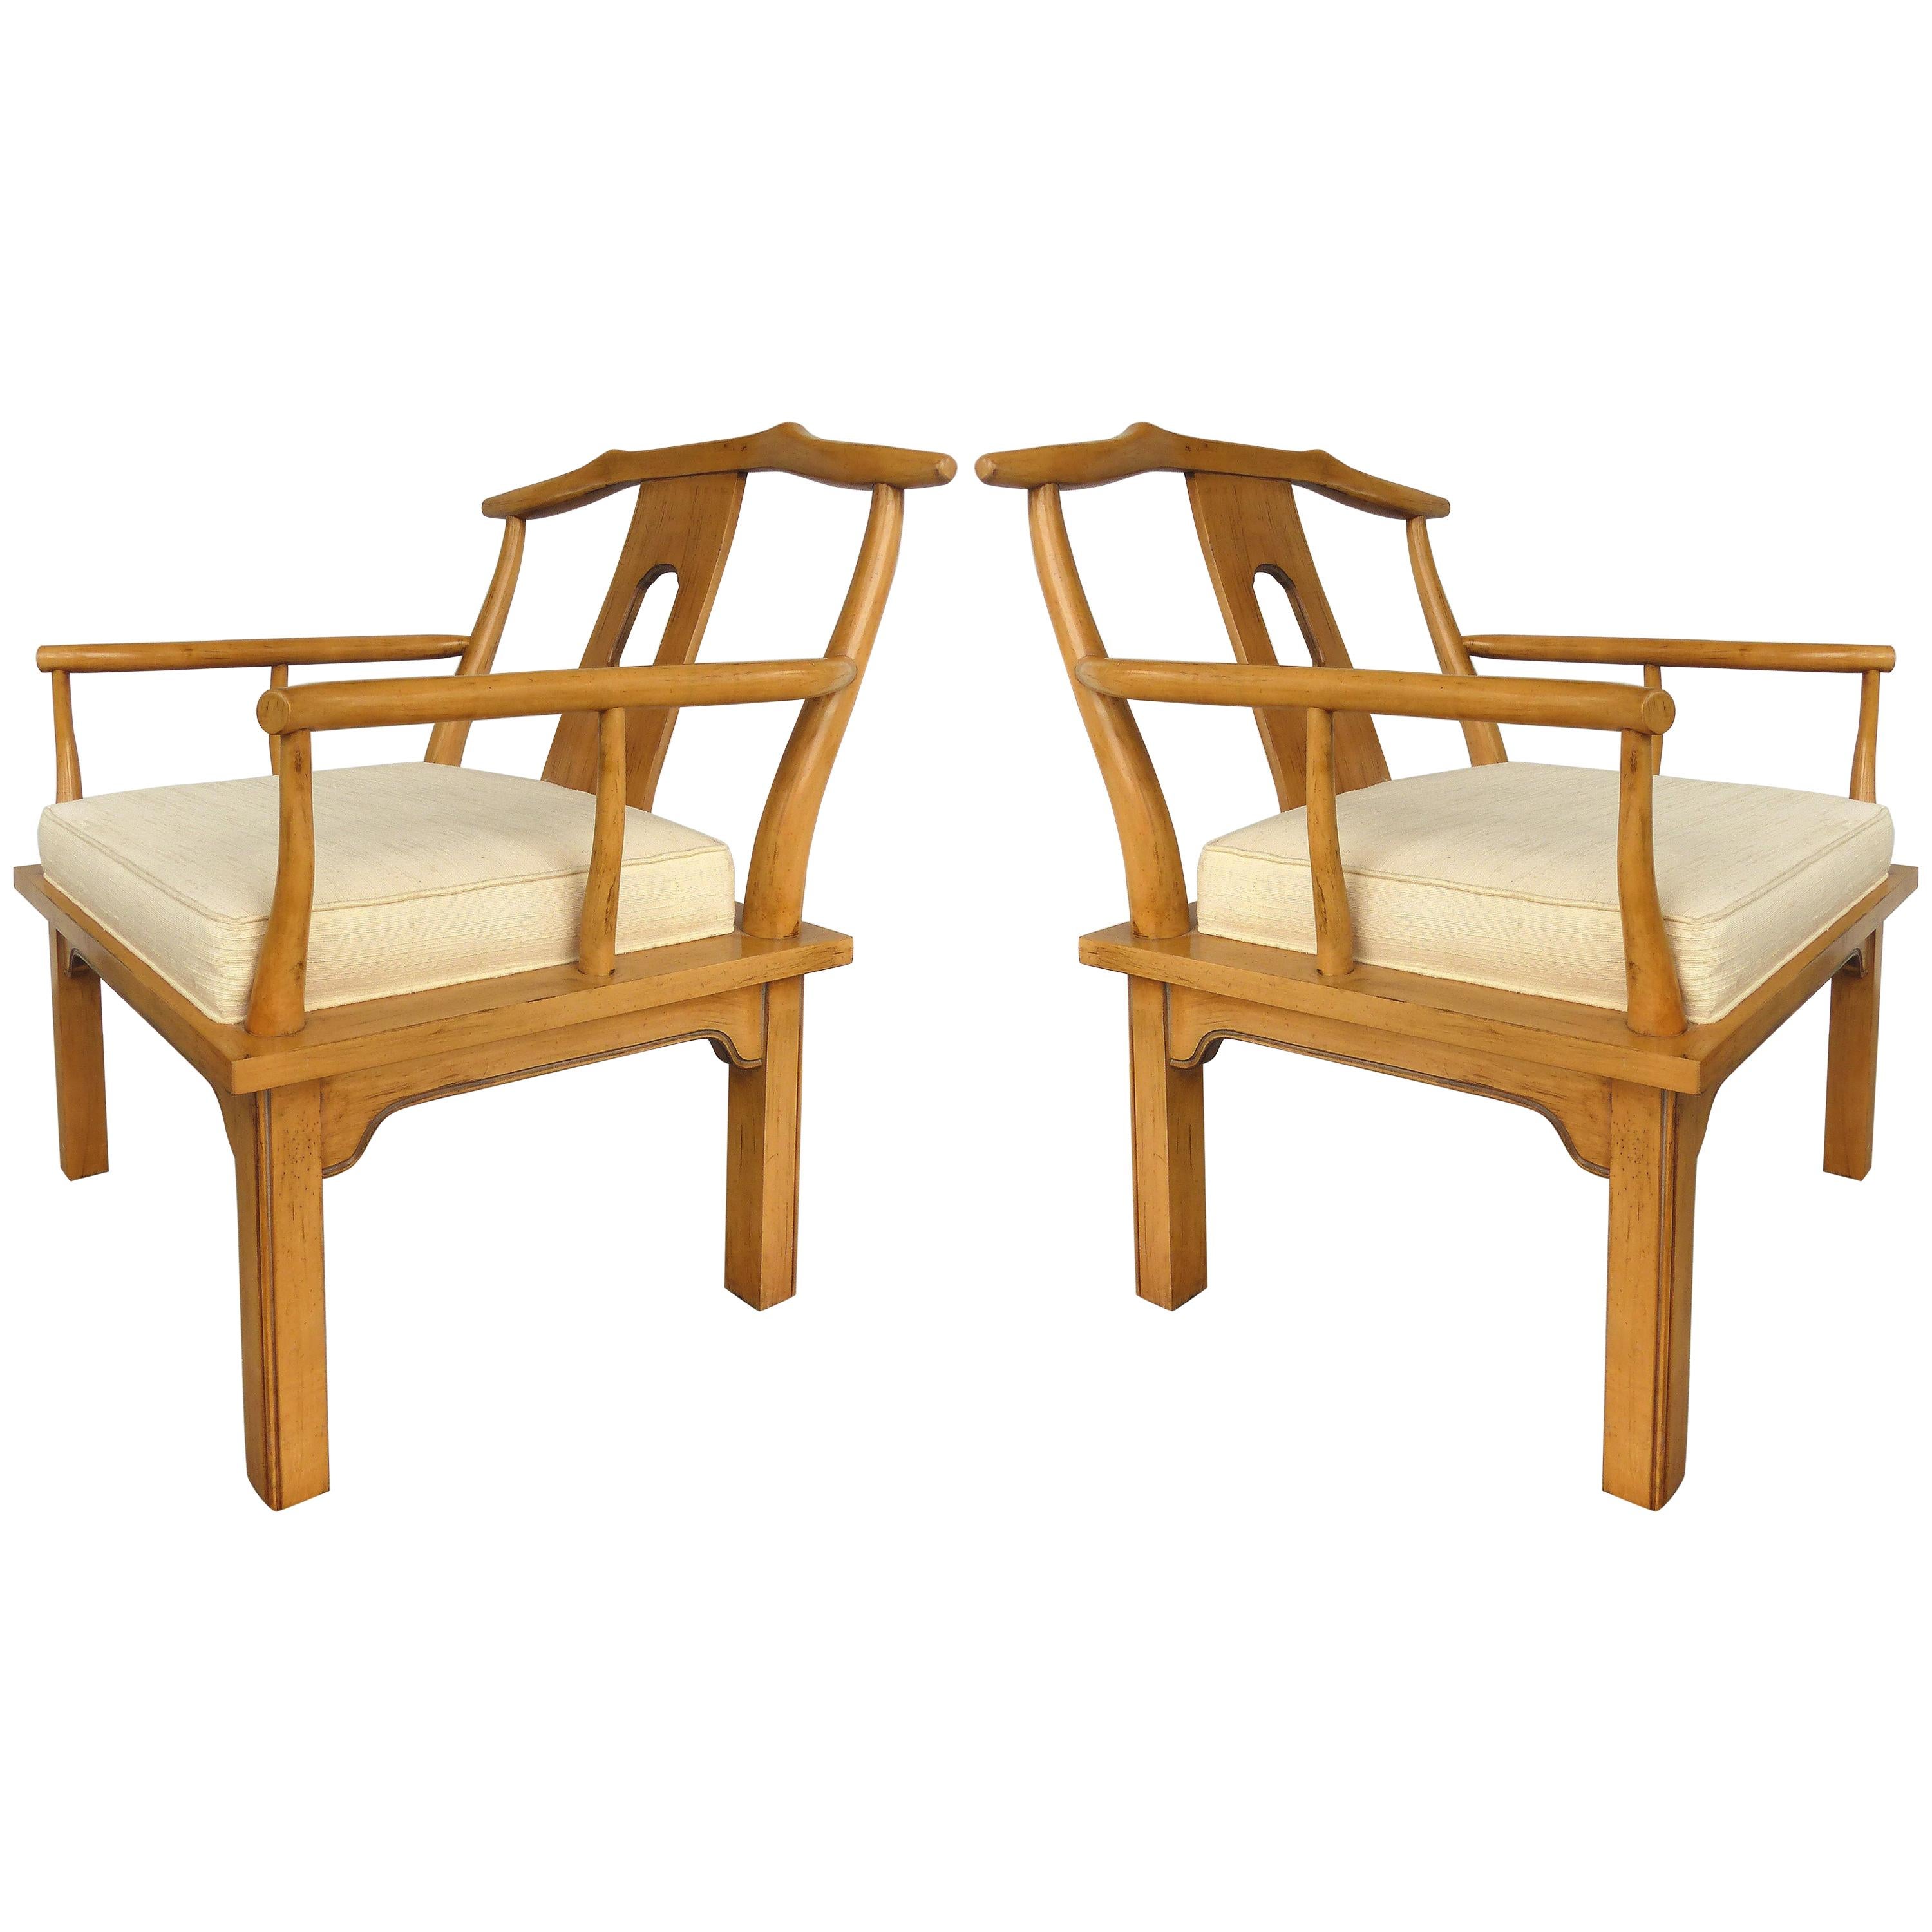 Midcentury Asian Modern Armchairs by the Century Furniture Company